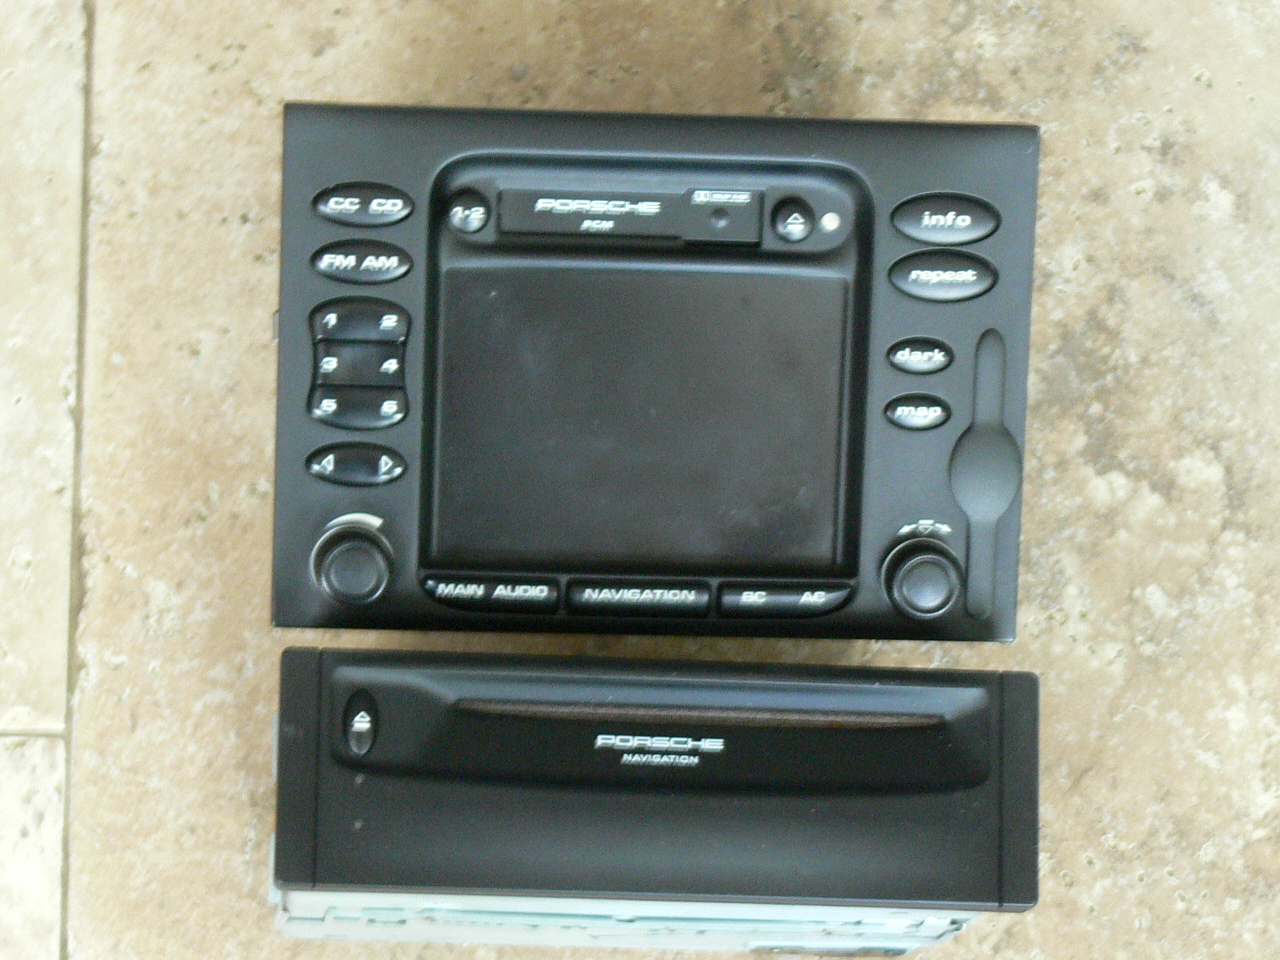 Trying to Install a PCM 1 Head Unit - Need help - Rennlist - Porsche  Discussion Forums